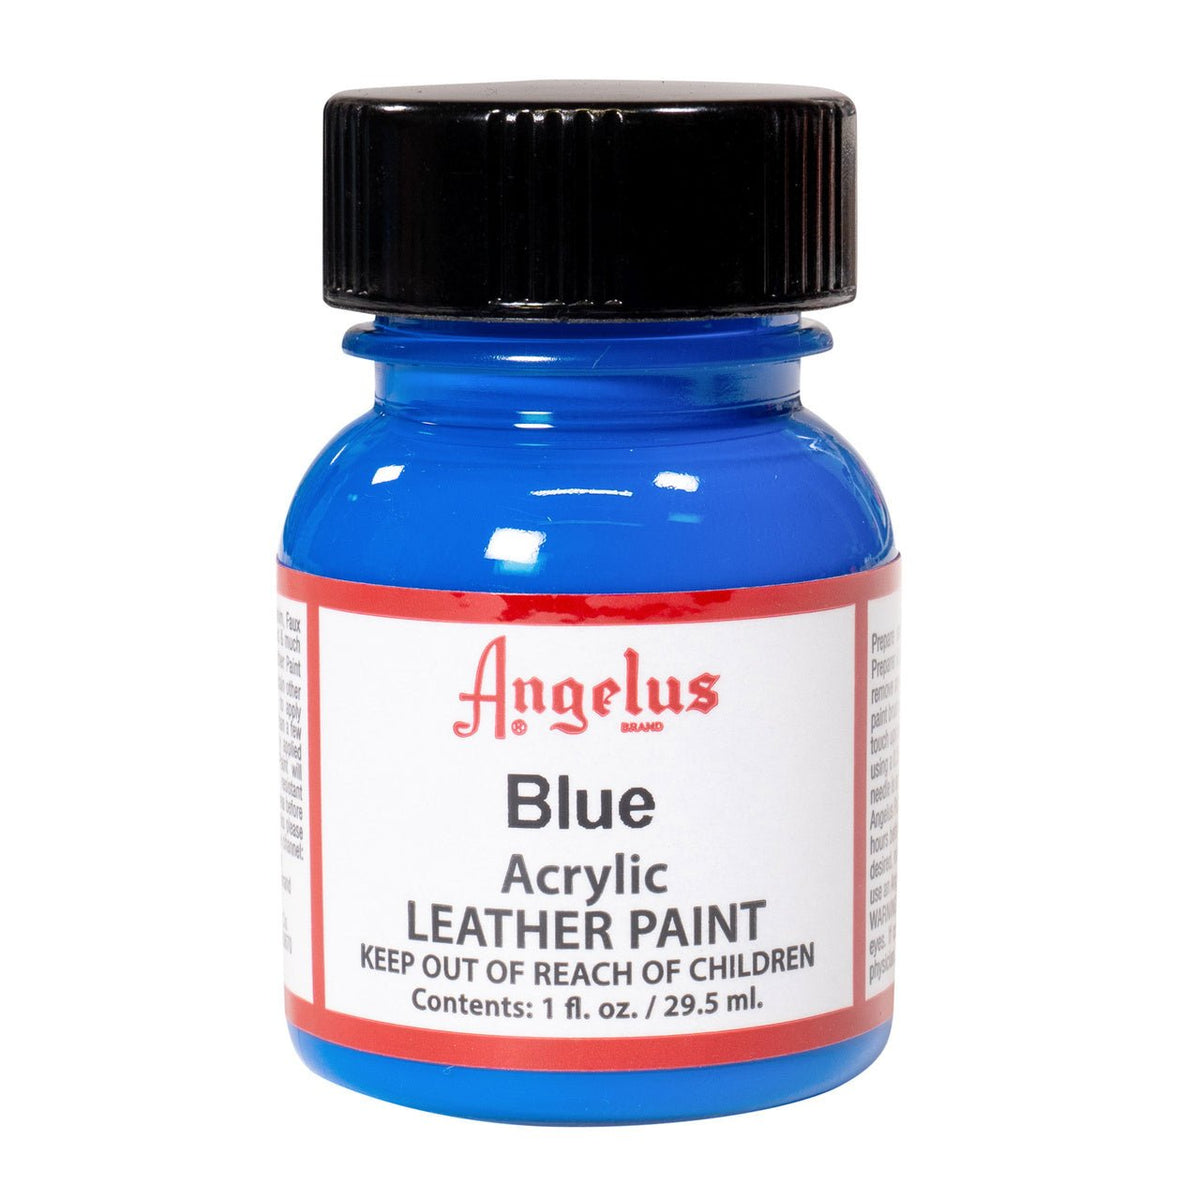 Angelus Brand Acrylic Leather Paint Matte Finisher No. 620 - 4oz - 2 Pack